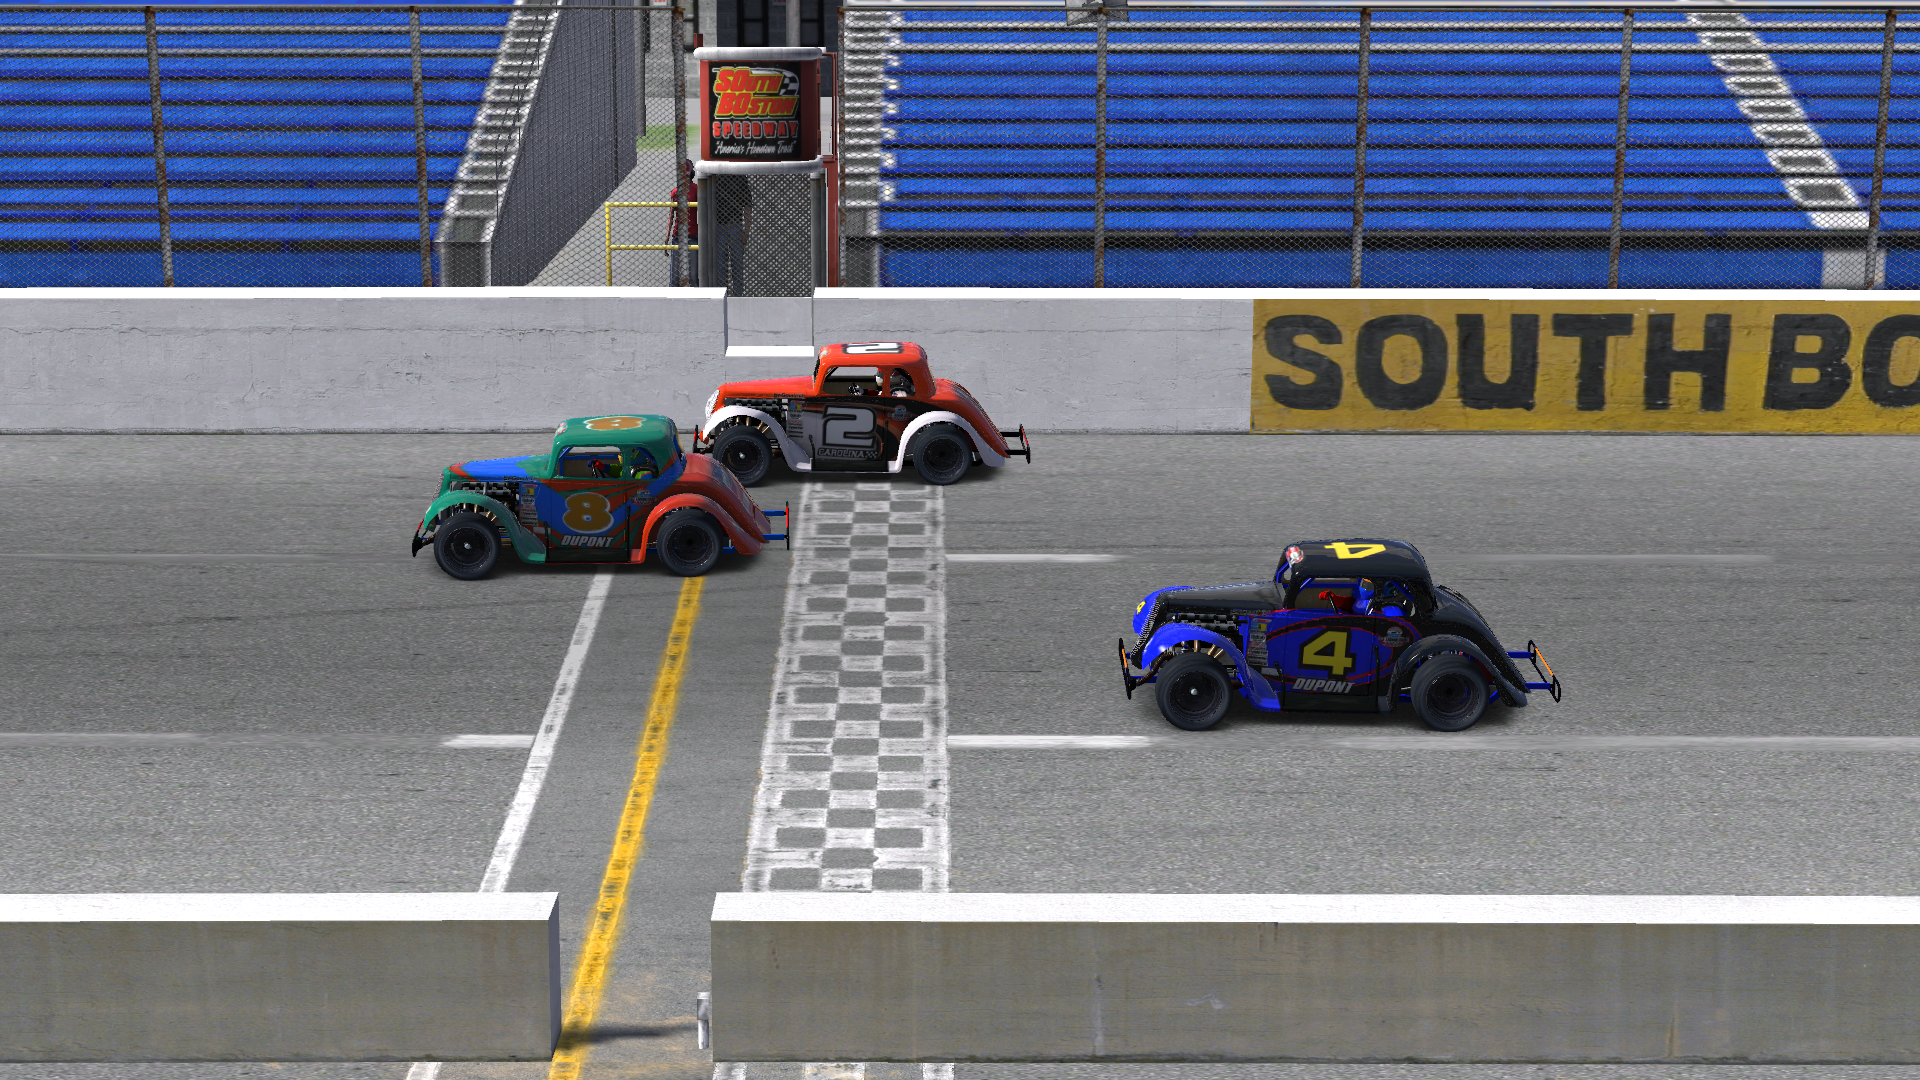 A close finish in my first oval win as I (#2 car, top) edged the #4 while negotiating lapped traffic (#8).